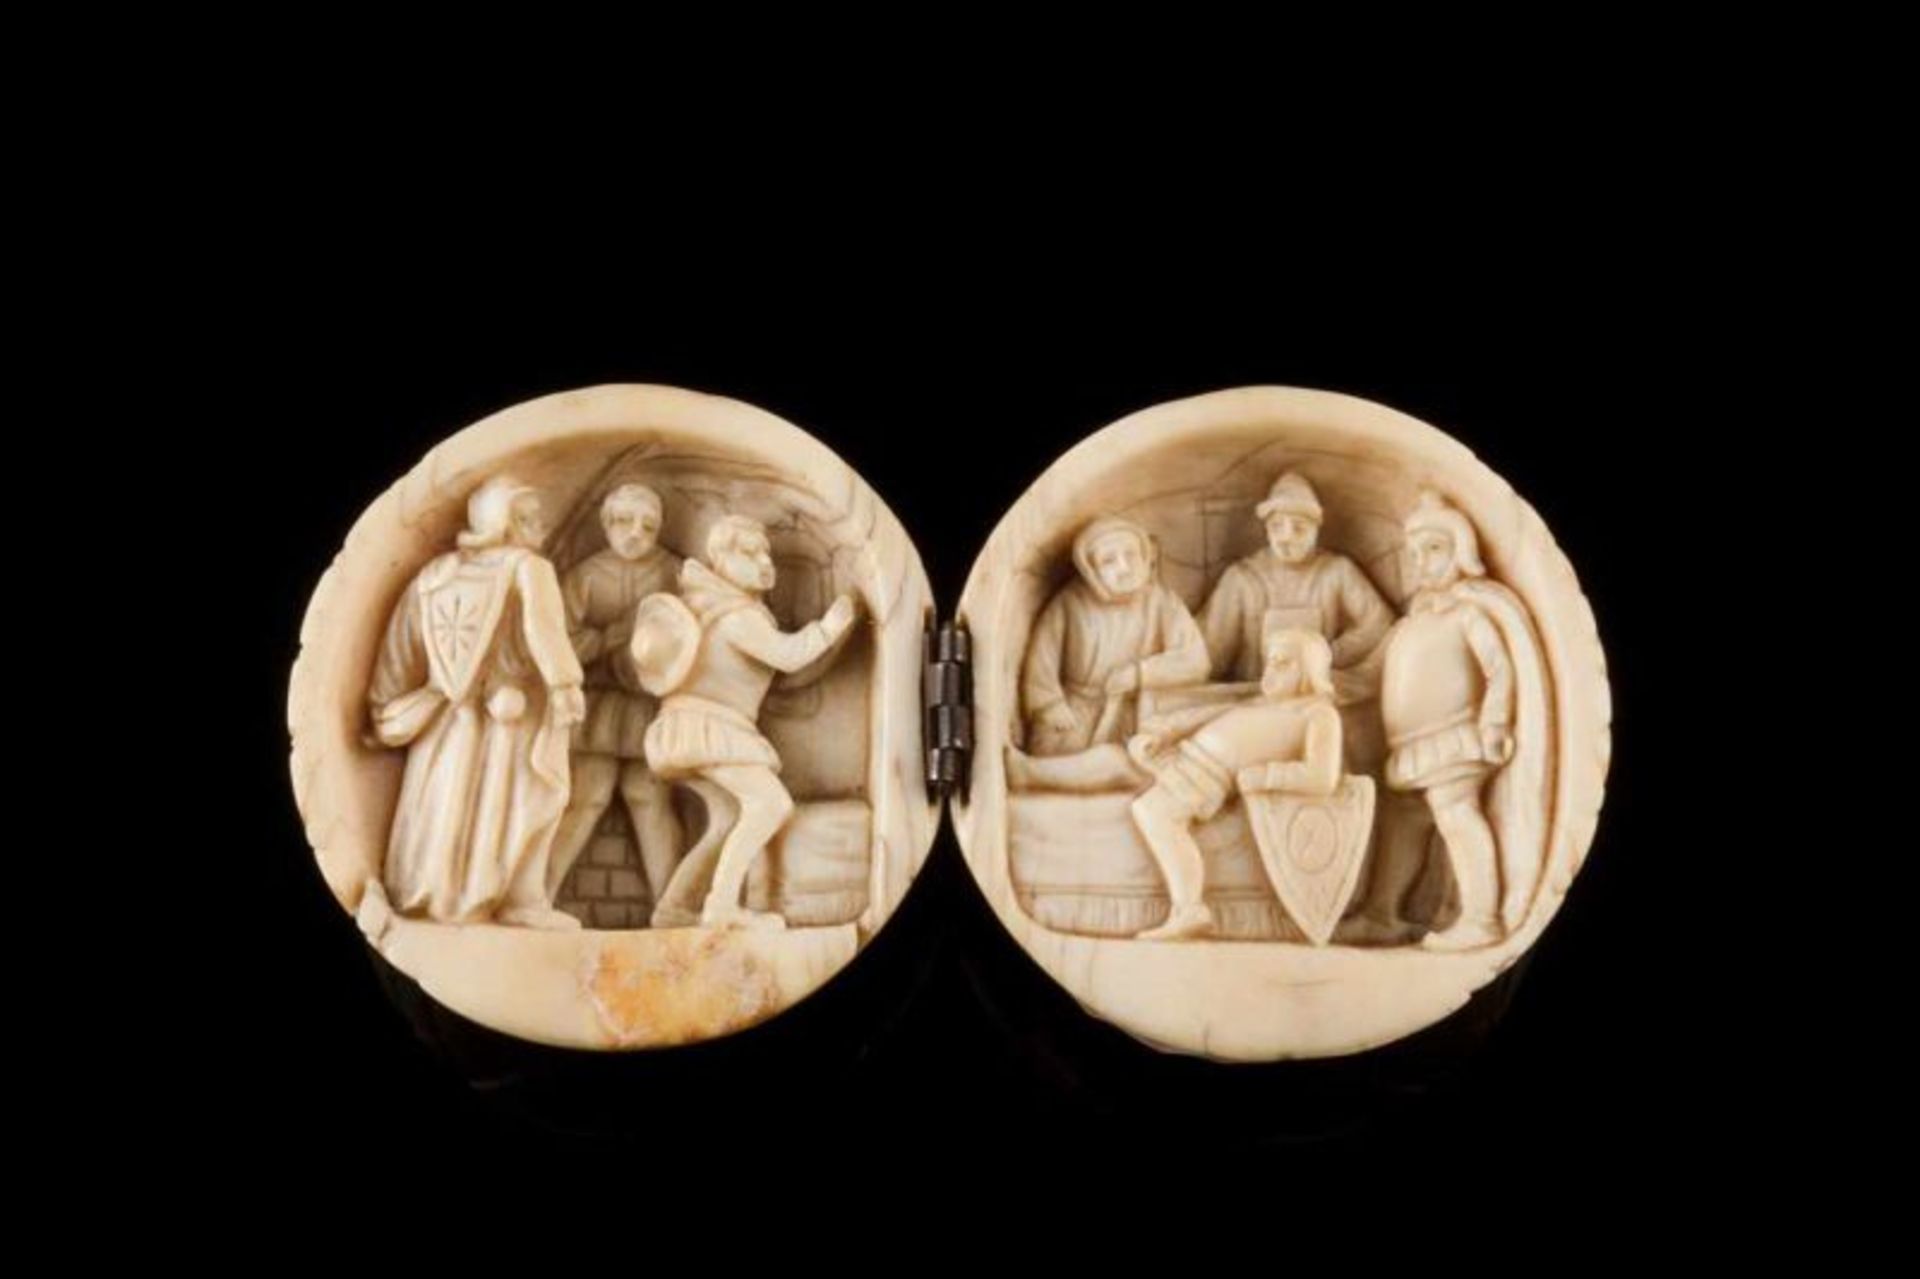 A nut-shaped diptych Carved ivory with medieval scenes Europe, 18th century 5,5x5 cm